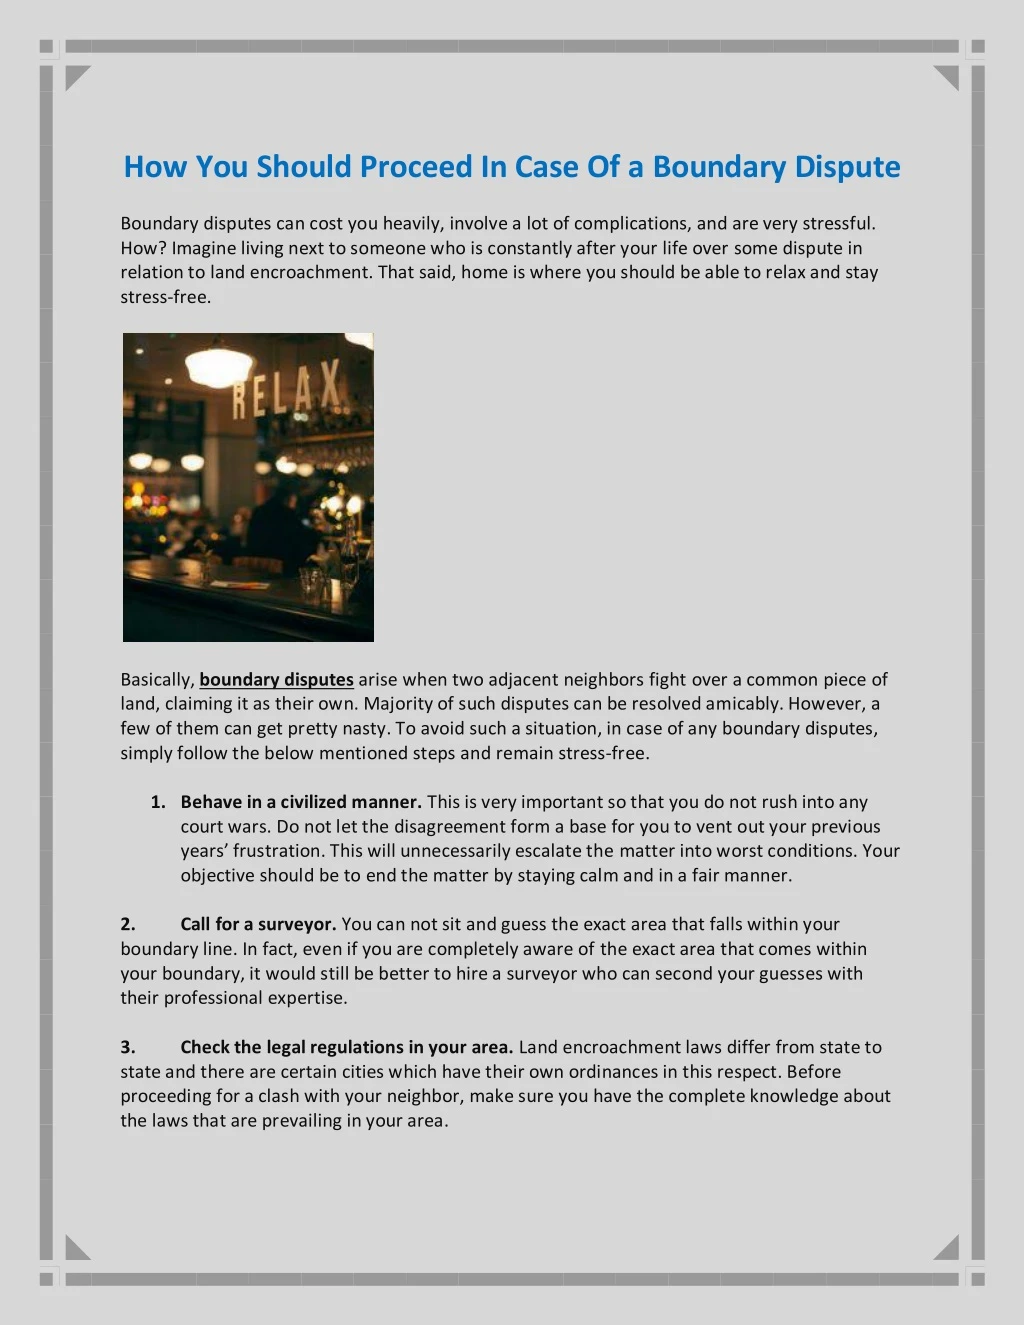 how you should proceed in case of a boundary